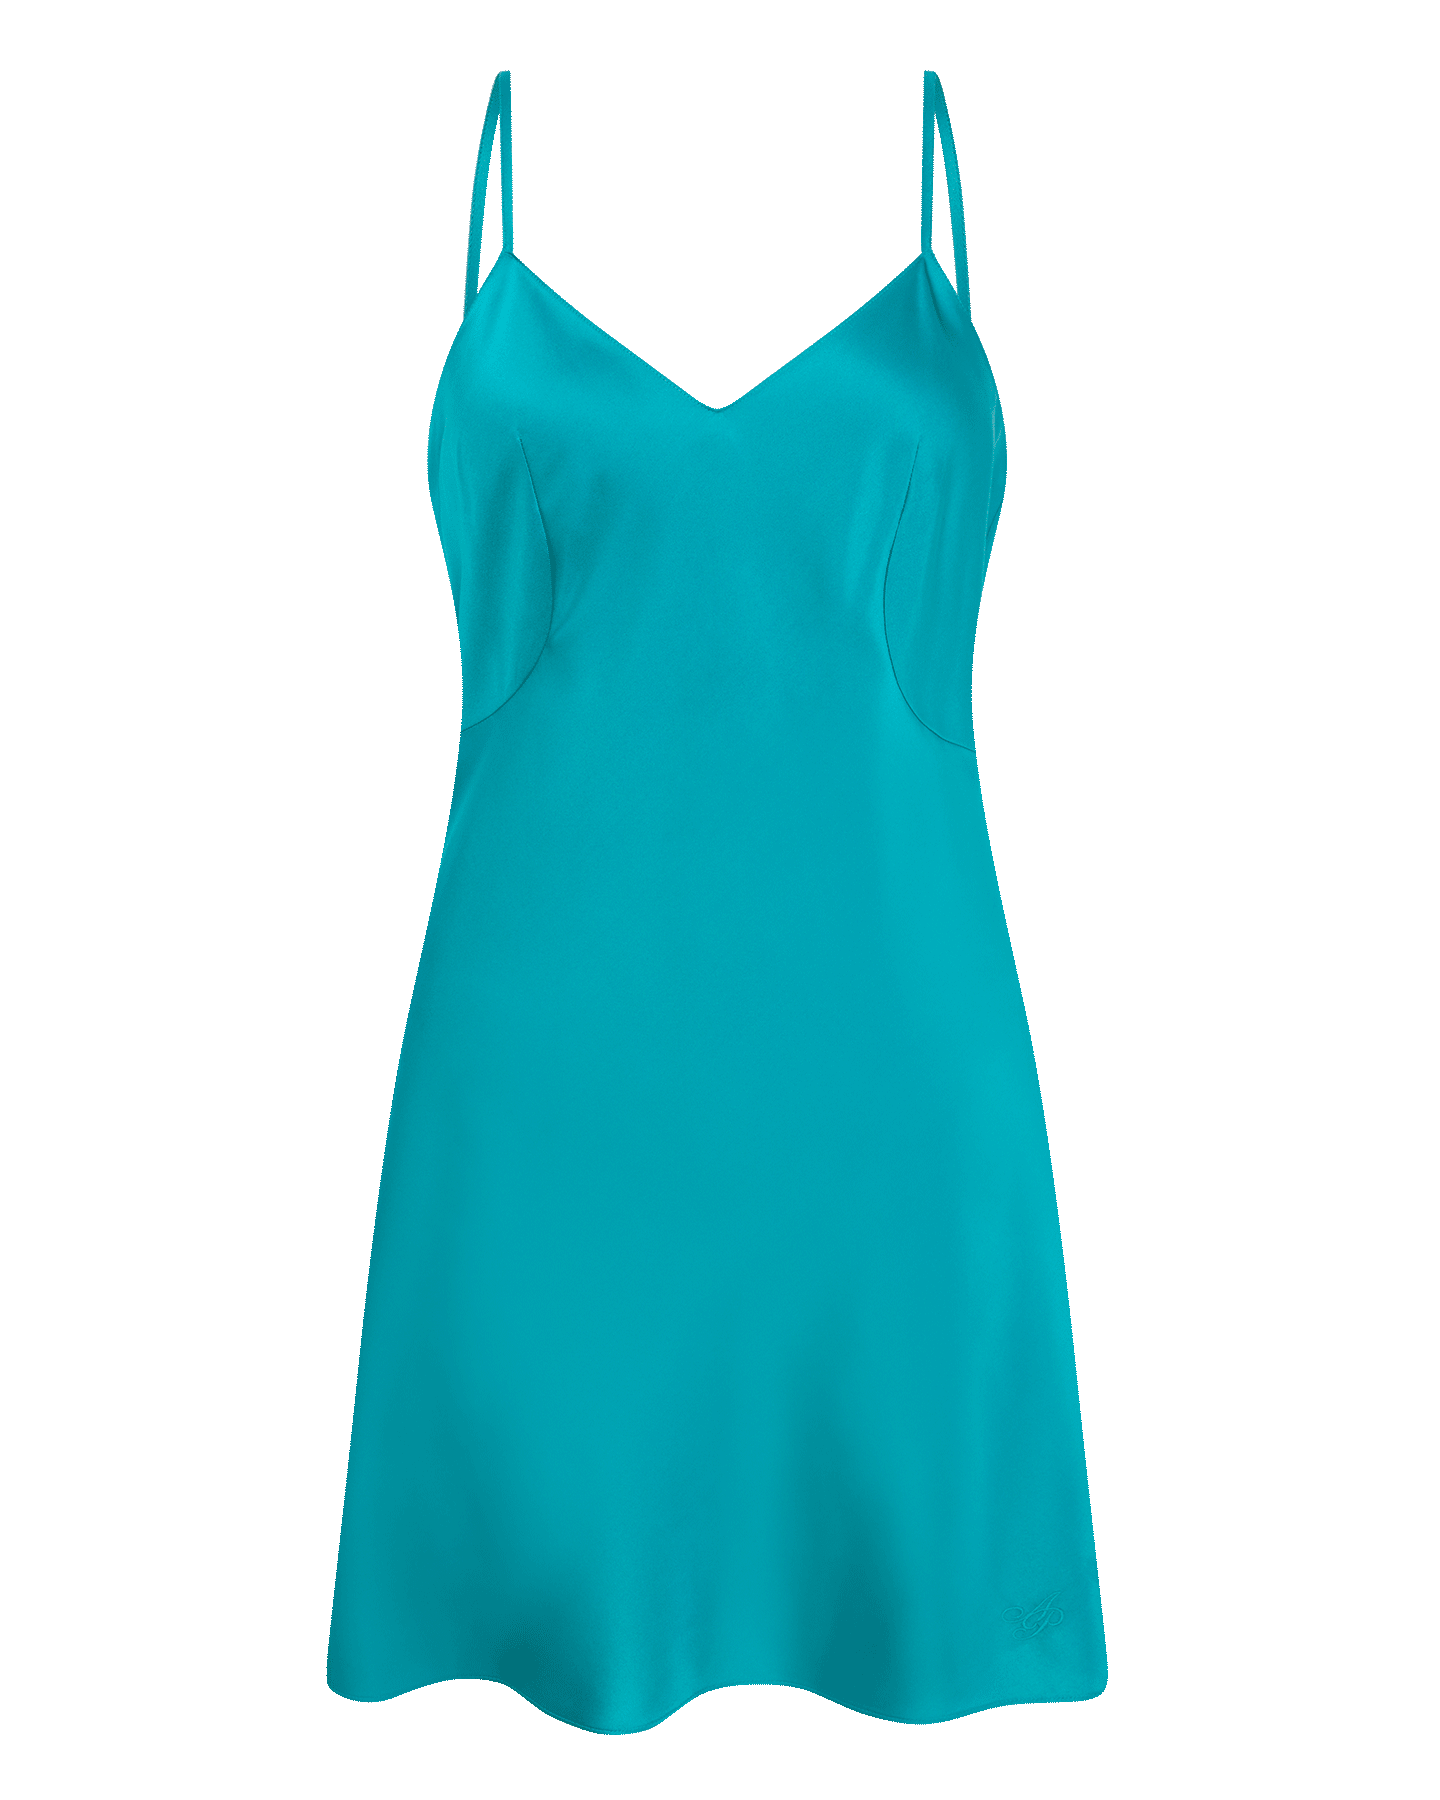 Christi Long Slip in Teal/Blue, By Agent Provocateur New In